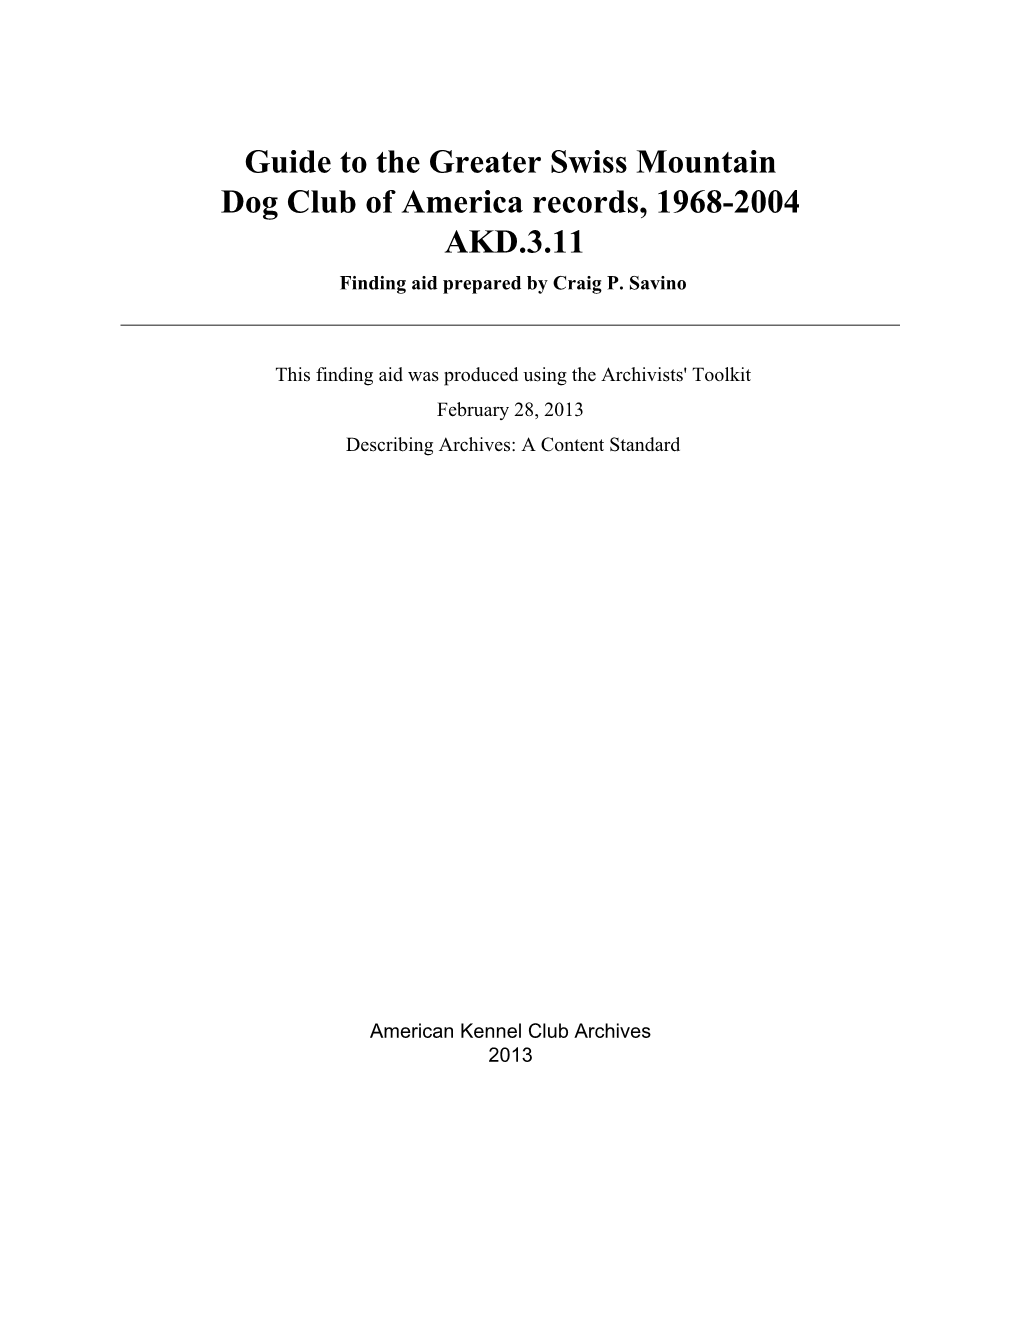 Greater Swiss Mountain Dog Club of America Records, 1968-2004 AKD.3.11 Finding Aid Prepared by Craig P